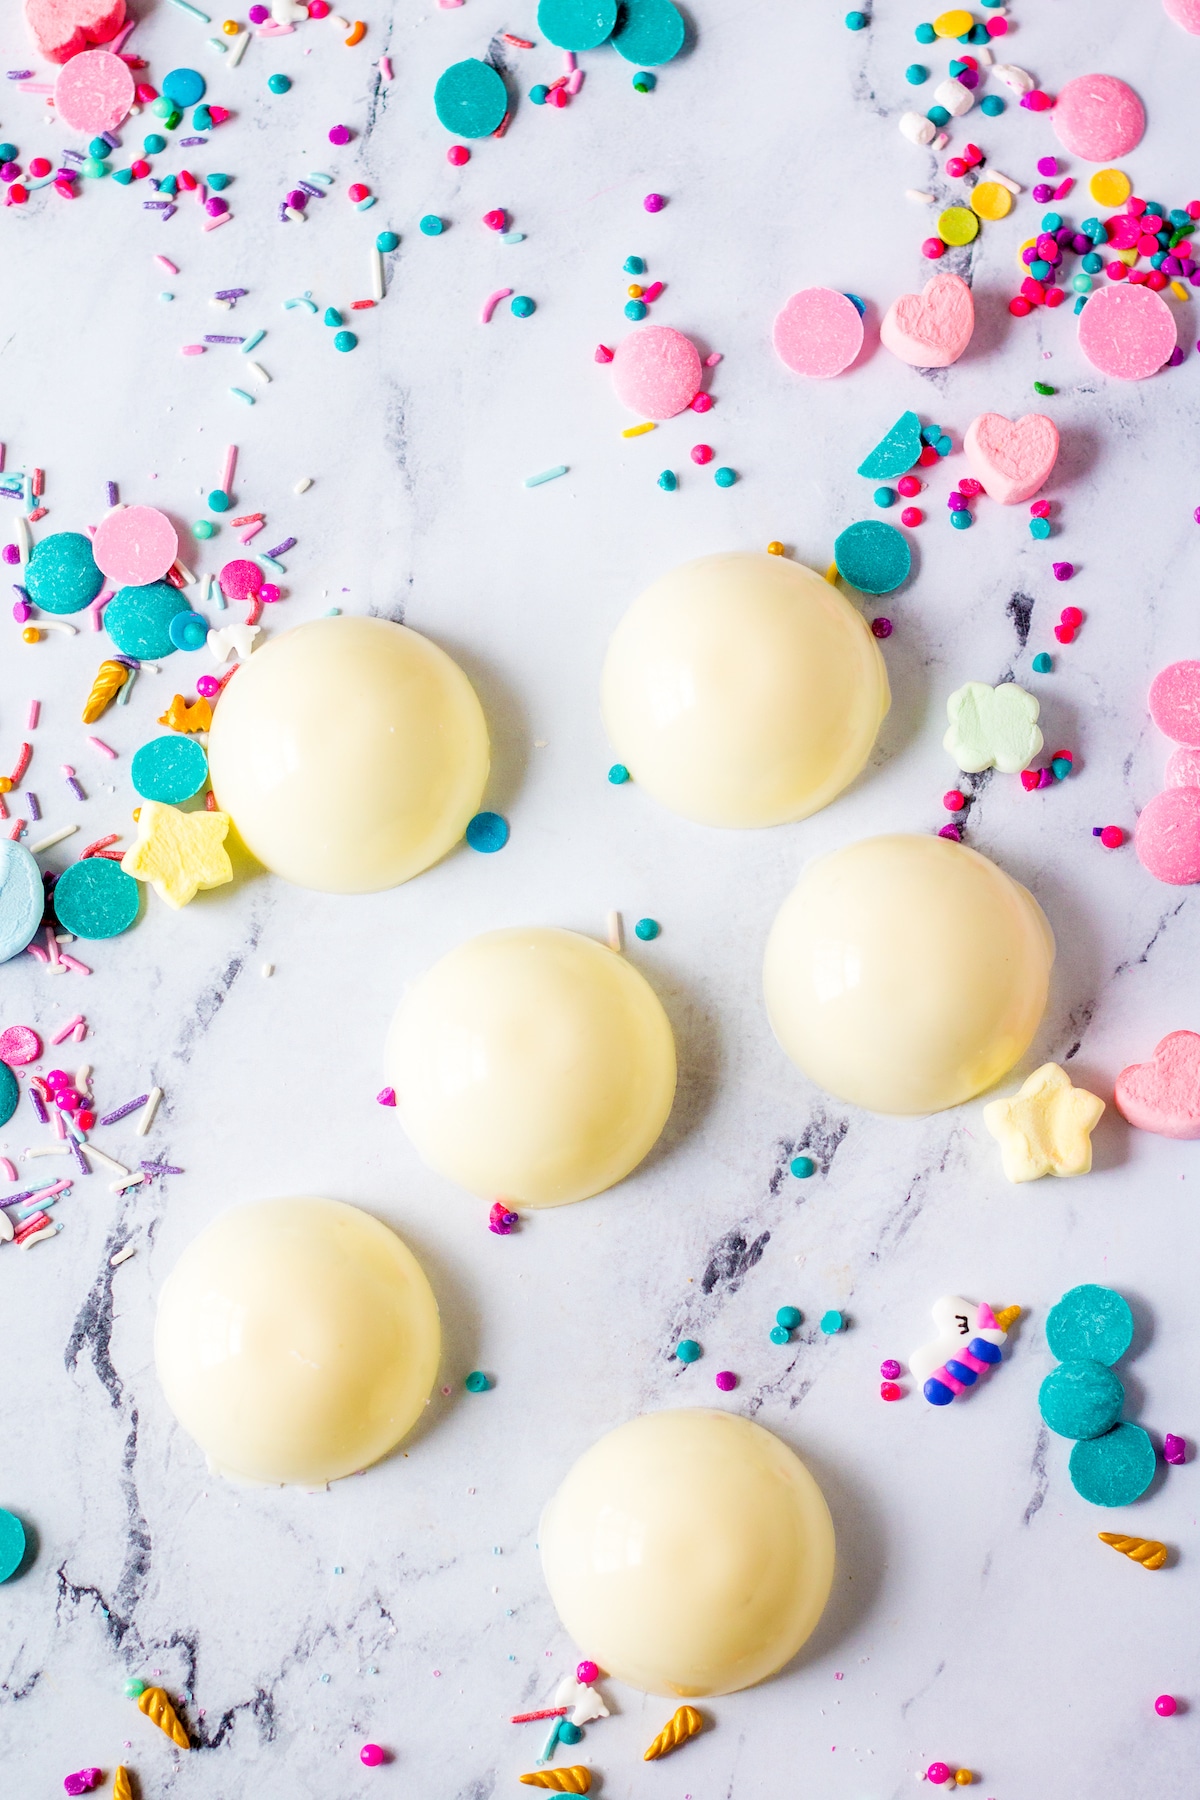 Overhead shot showing white hot chocolate bombs with unicorn sprinkles all around them